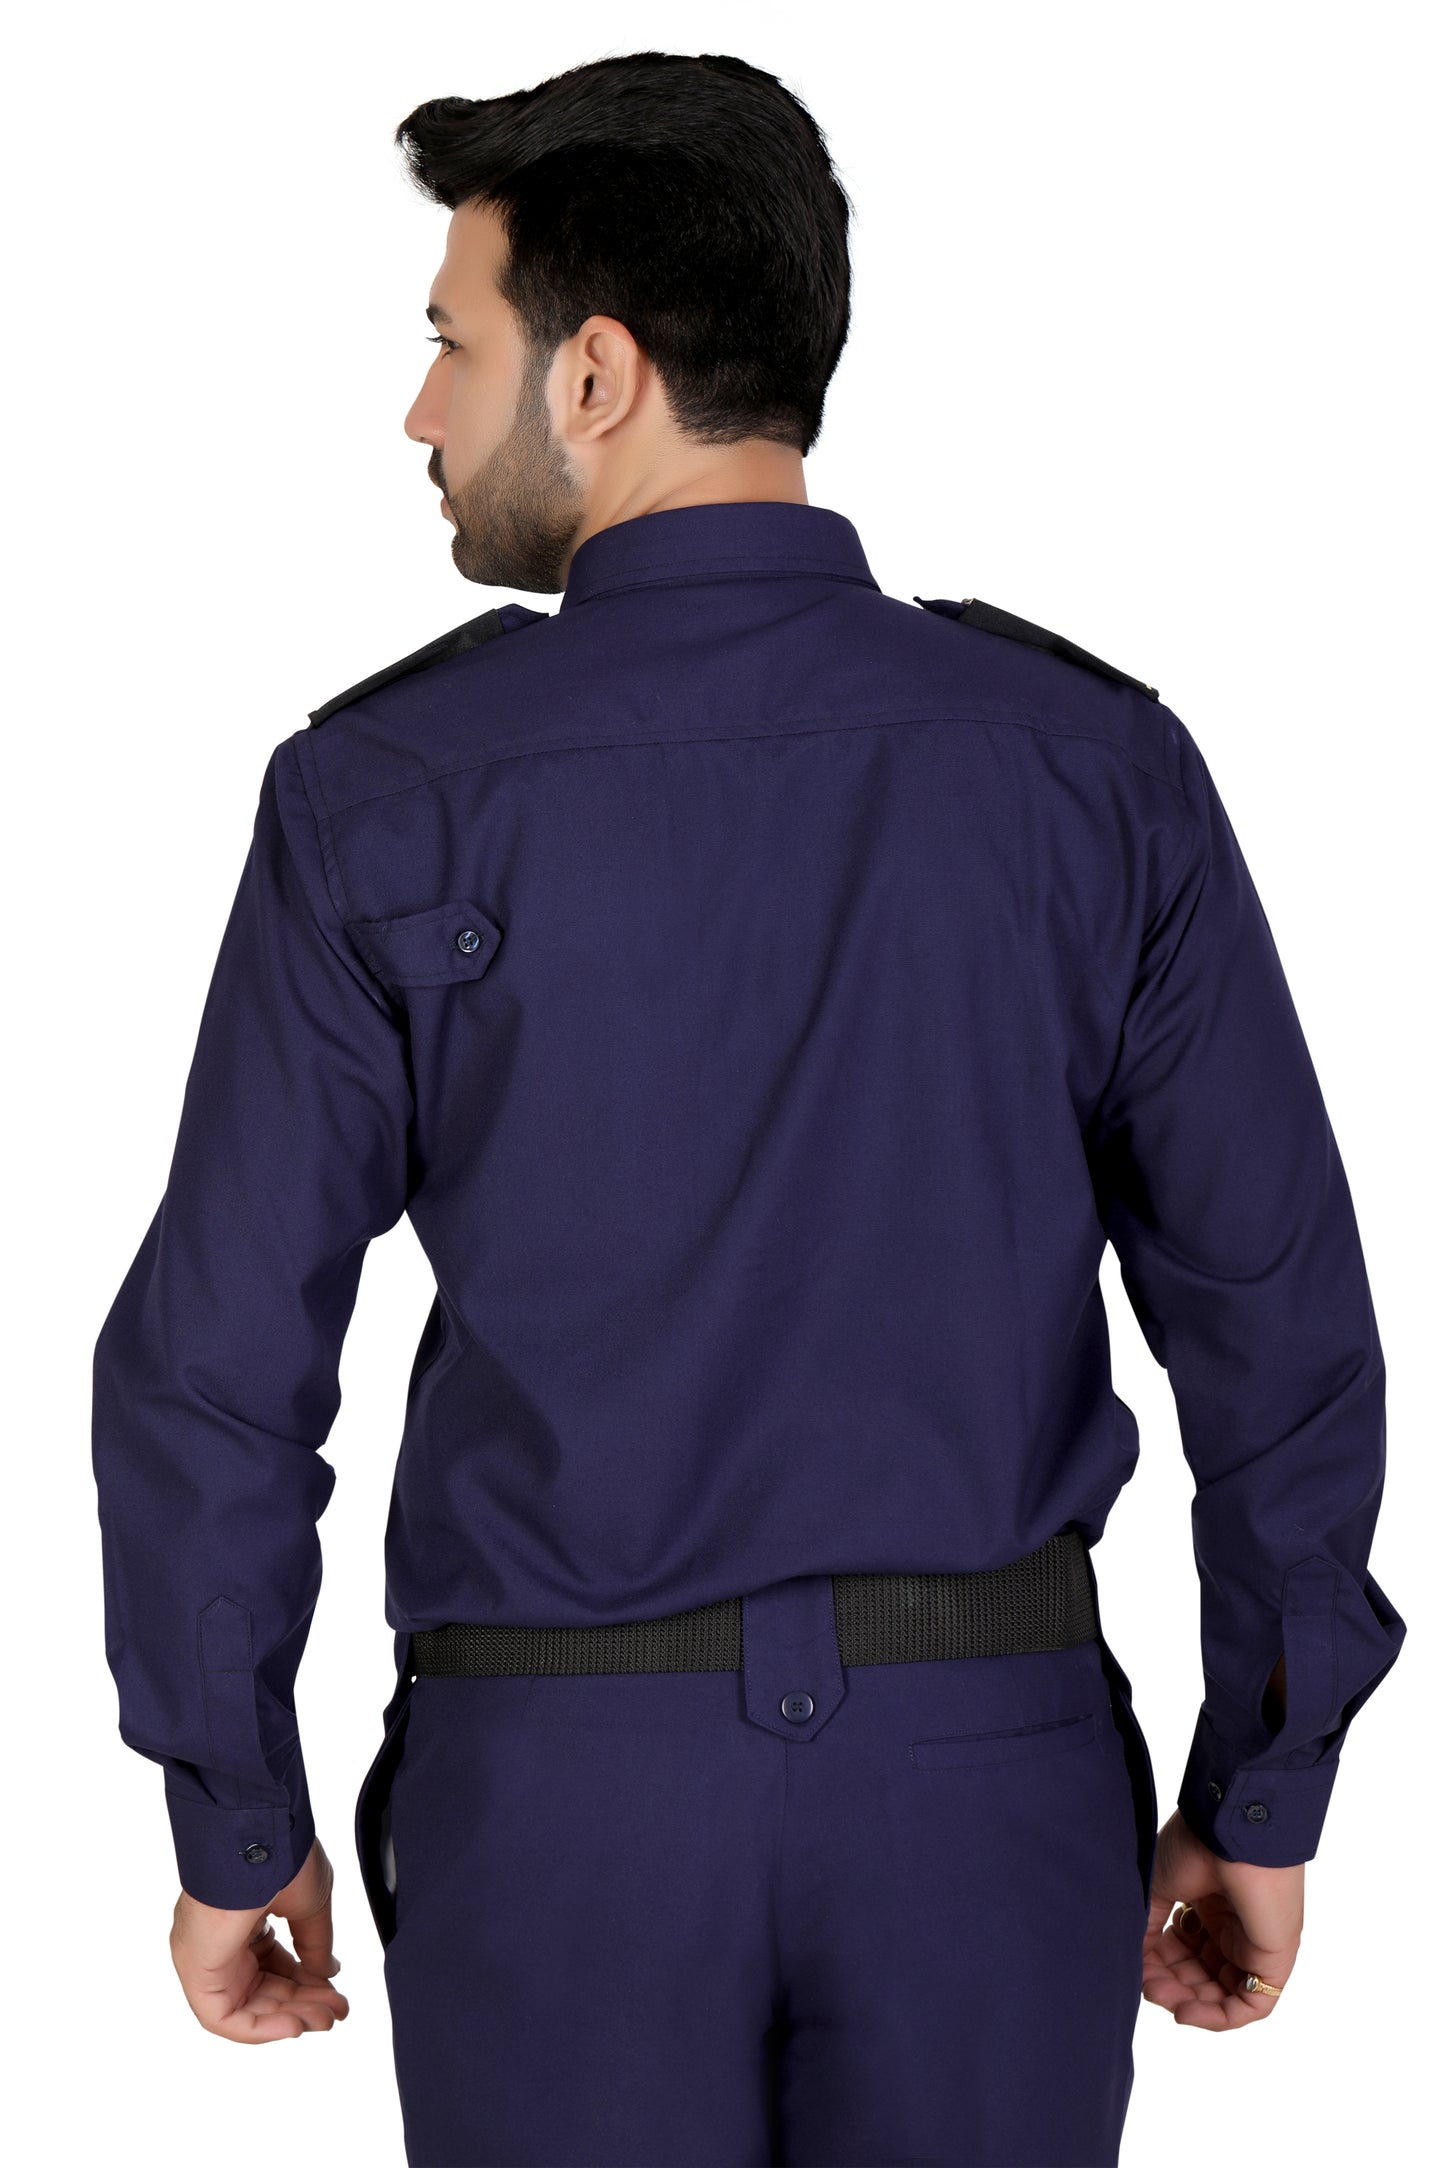 Security Guard Full Sleeves Shirt - Navy Blue